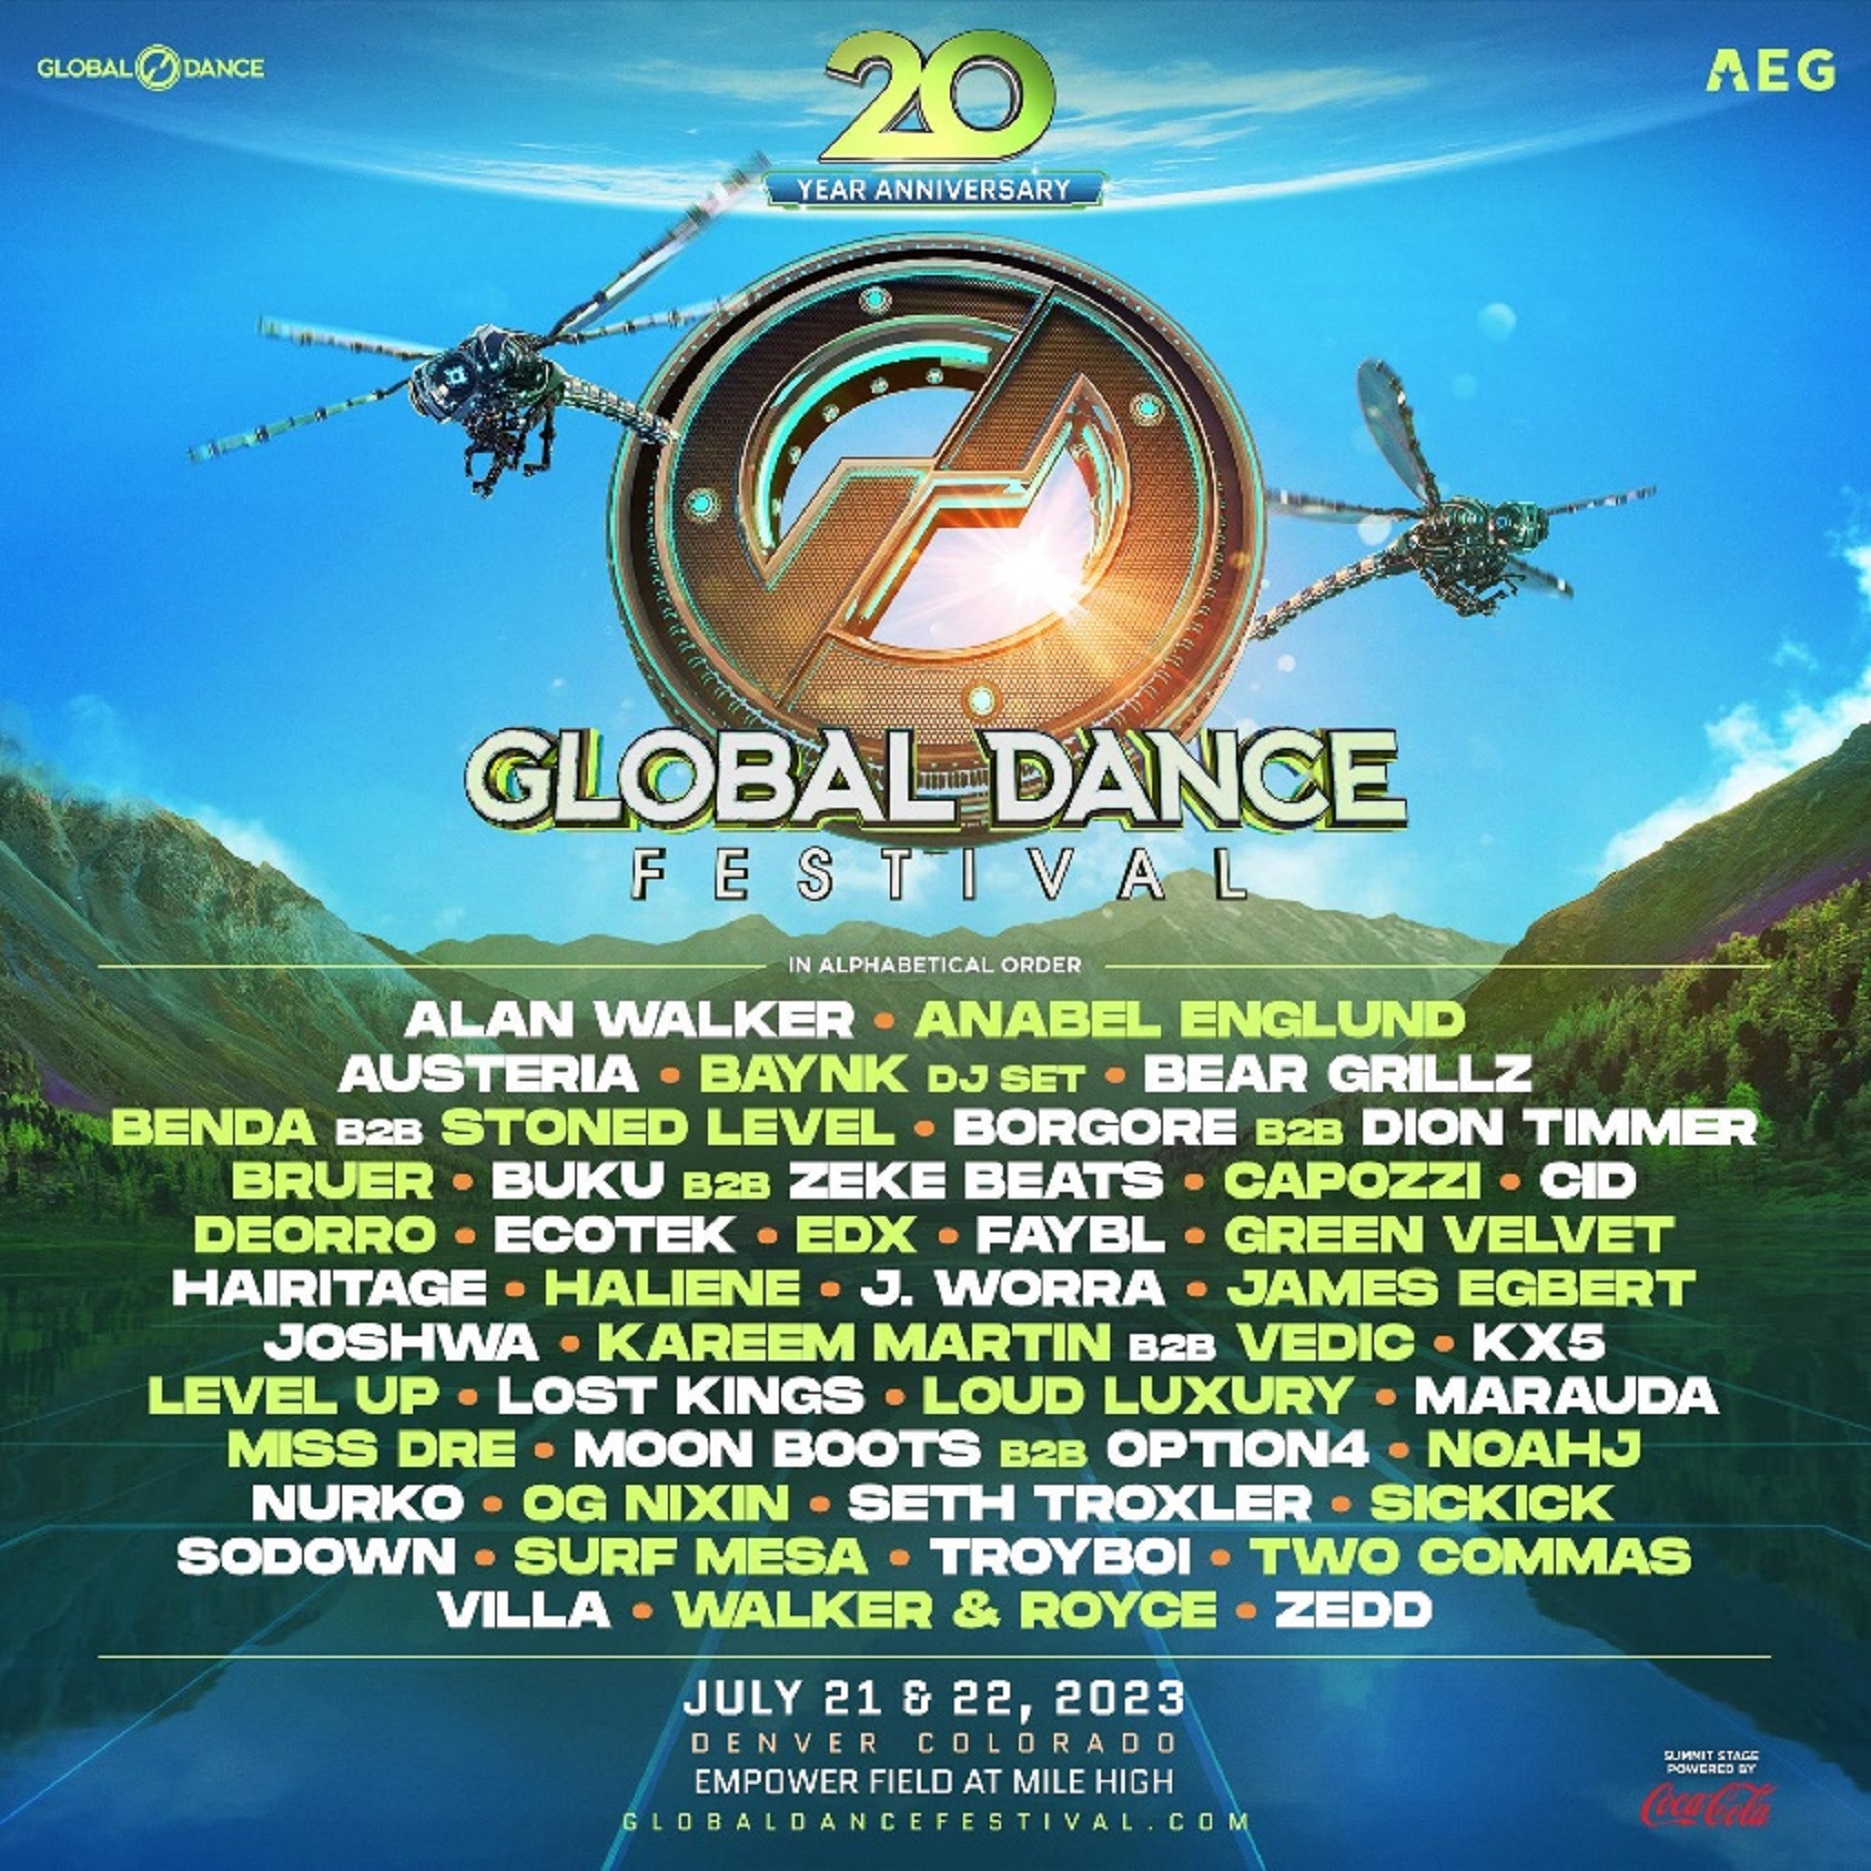 GLOBAL DANCE FESTIVAL live  at Empower Field at Mile High on Friday, July 21 & Saturday, July 22, 2023